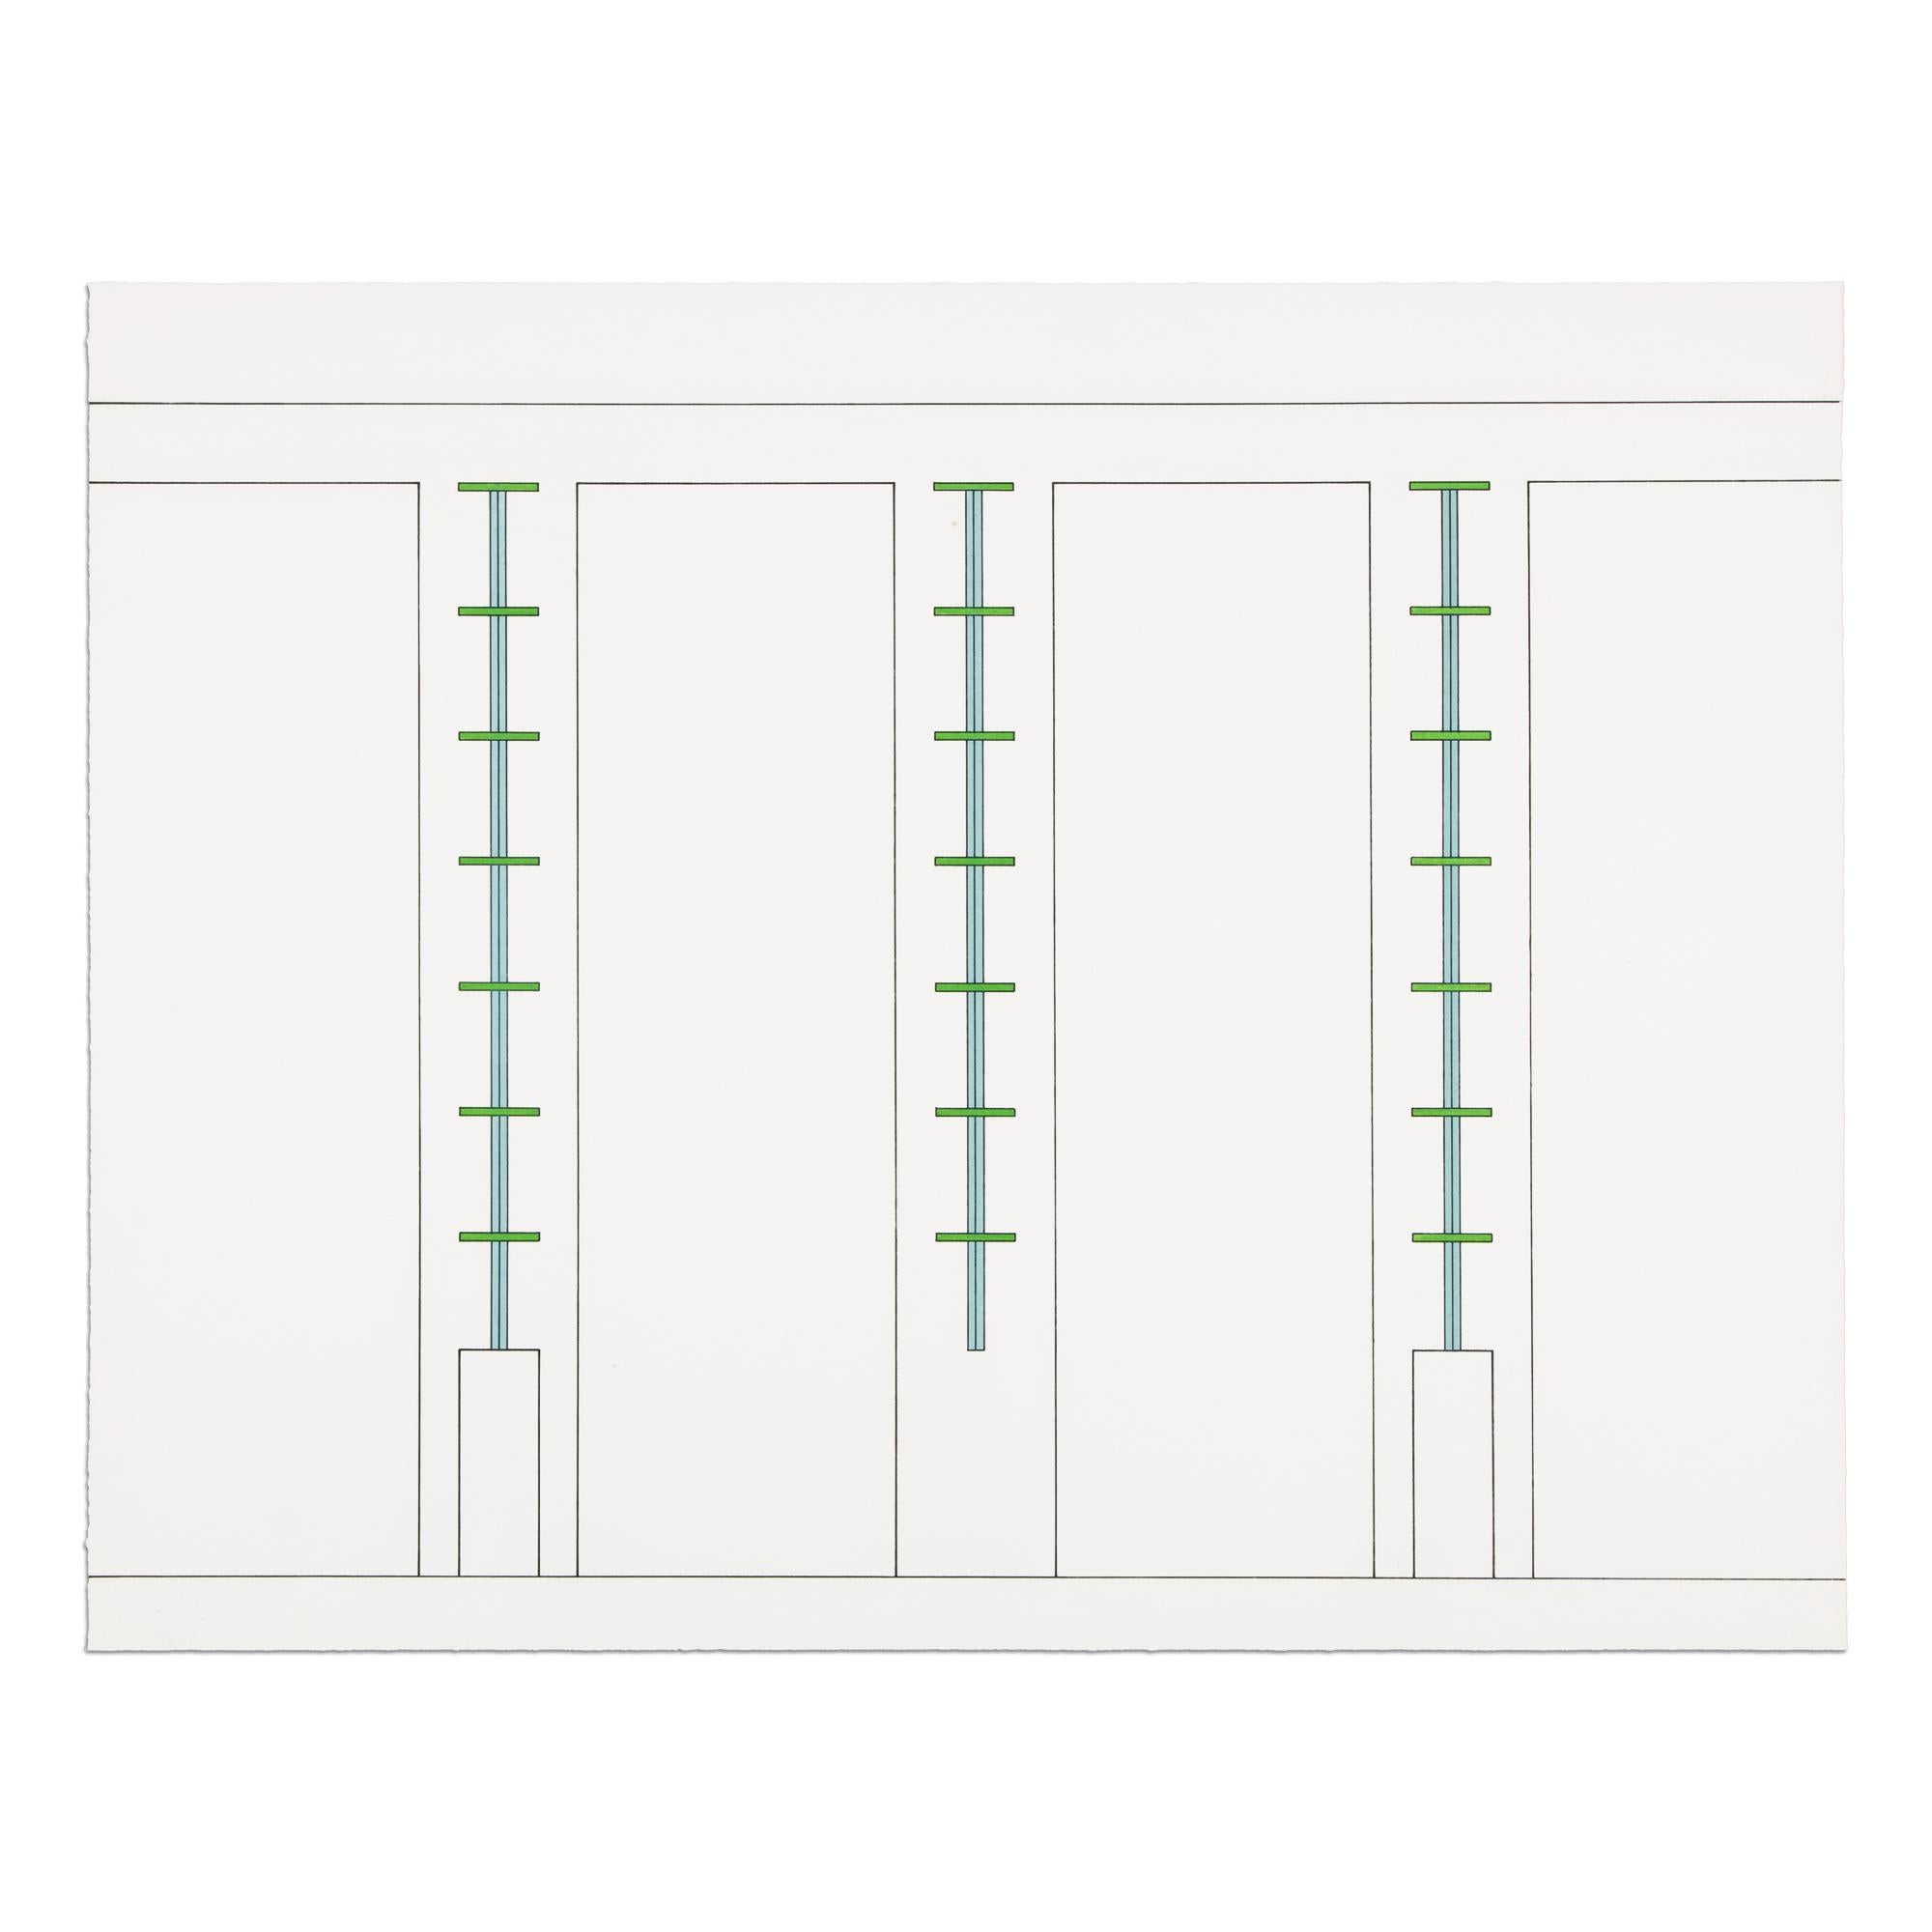 Dan Flavin (American, 1933-1996)
Untitled (Sheet 10 from Projects 1963-1995), 1997
Medium: Etching and aquatint on rag paper
Dimensions: 52.1 × 66 cm (20 1/2 × 26 in)
Edition of 36: Estate-signed and numbered by Stephen Flavin (Dan Flavin’s son),